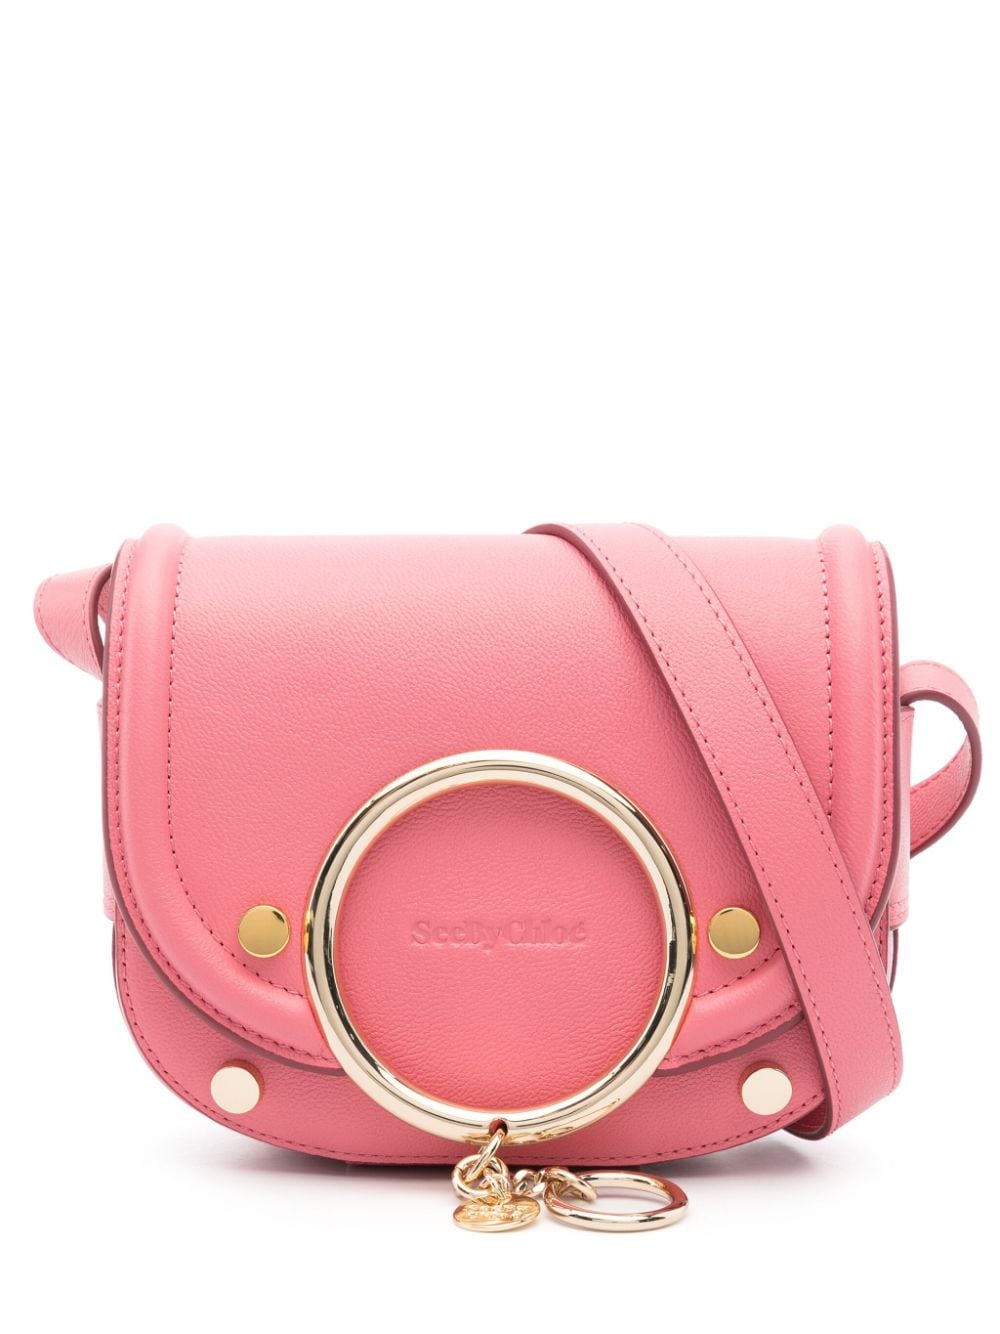 Image 1 of See by Chloé Mara leather mini bag